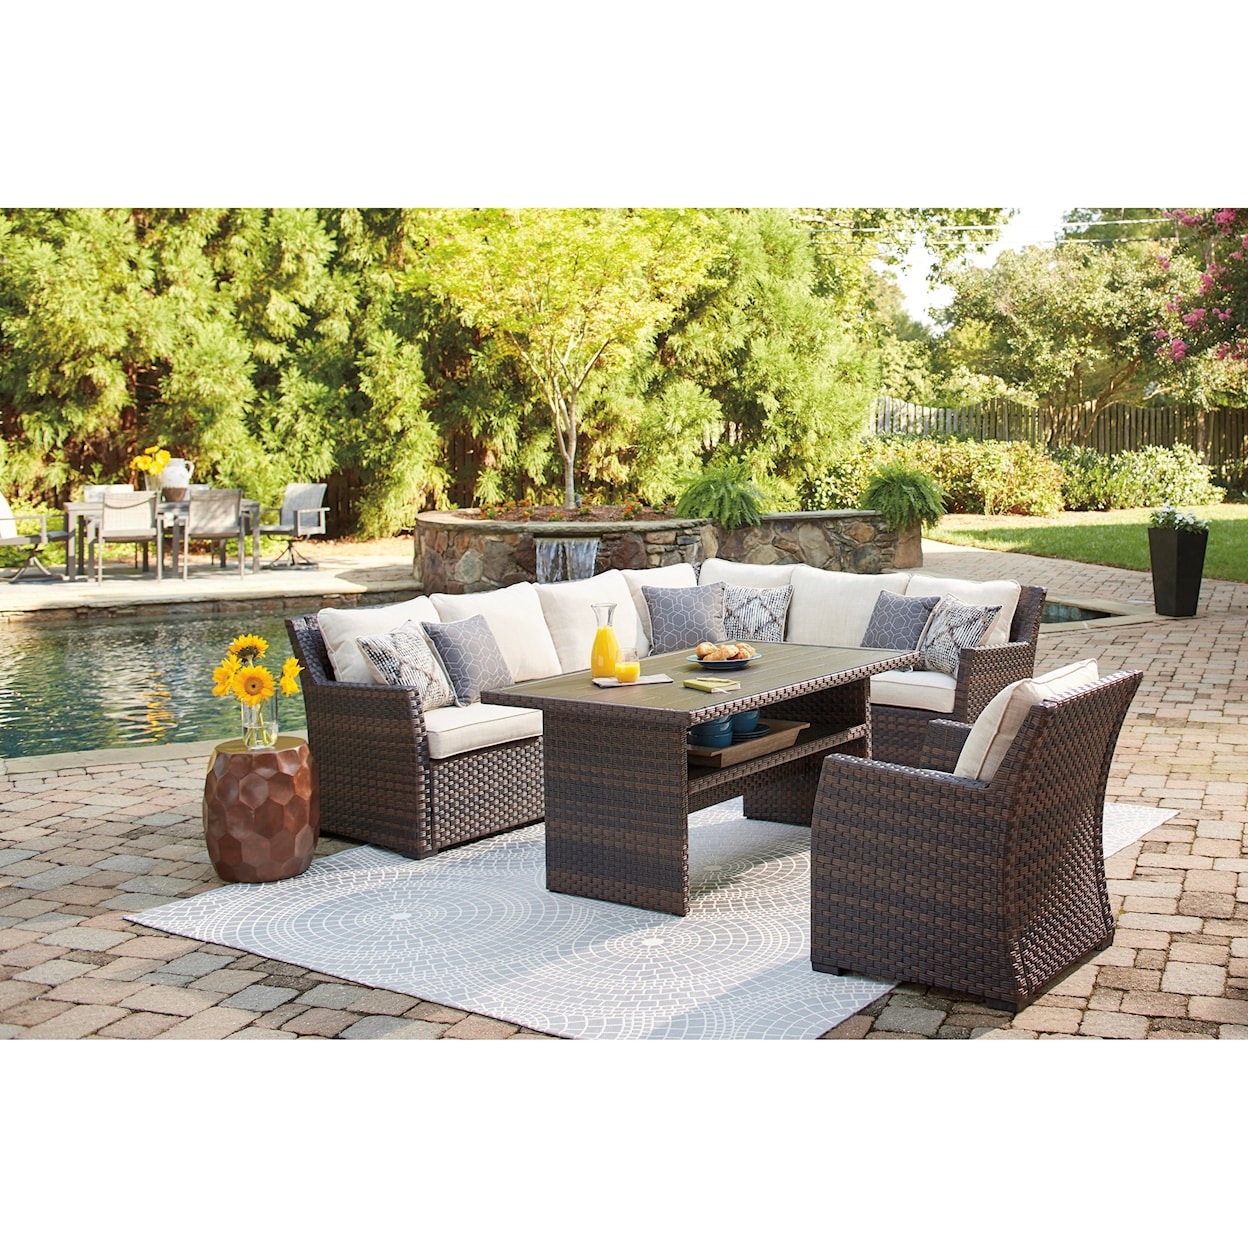 Signature Design by Ashley Easy Isle Outdoor Sectional with Table & Lounge Chair